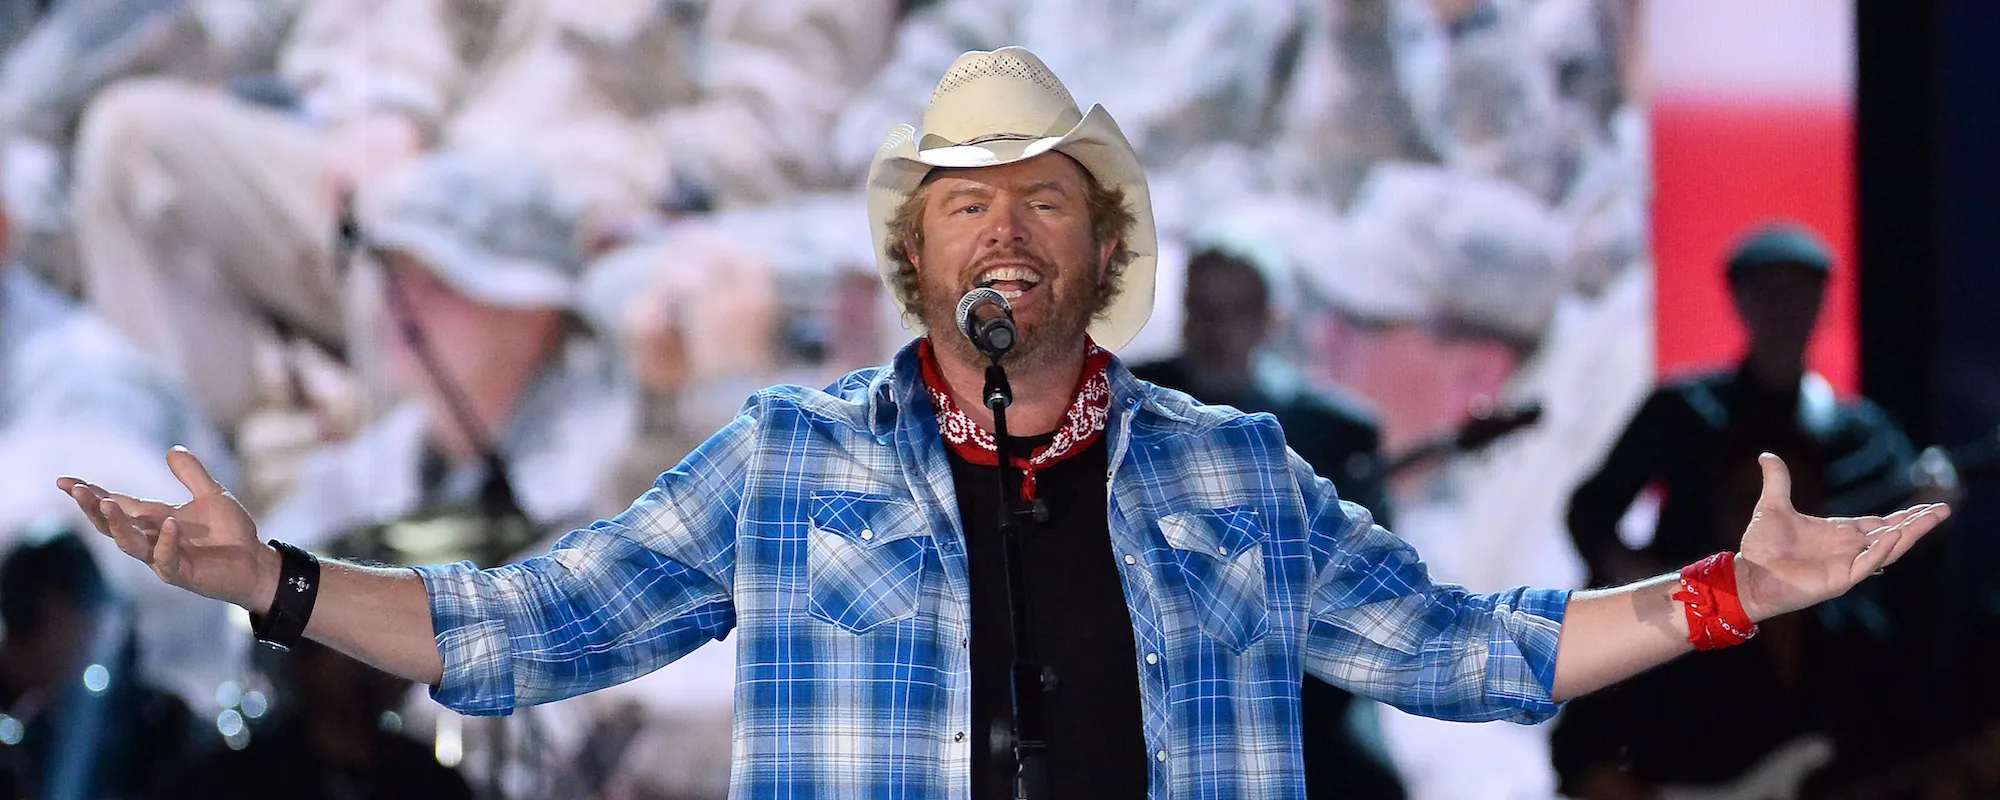 The Unabashed Meaning Behind Toby Keith’s Patriotic Hit “Courtesy of the Red, White, and Blue (The Angry American)”